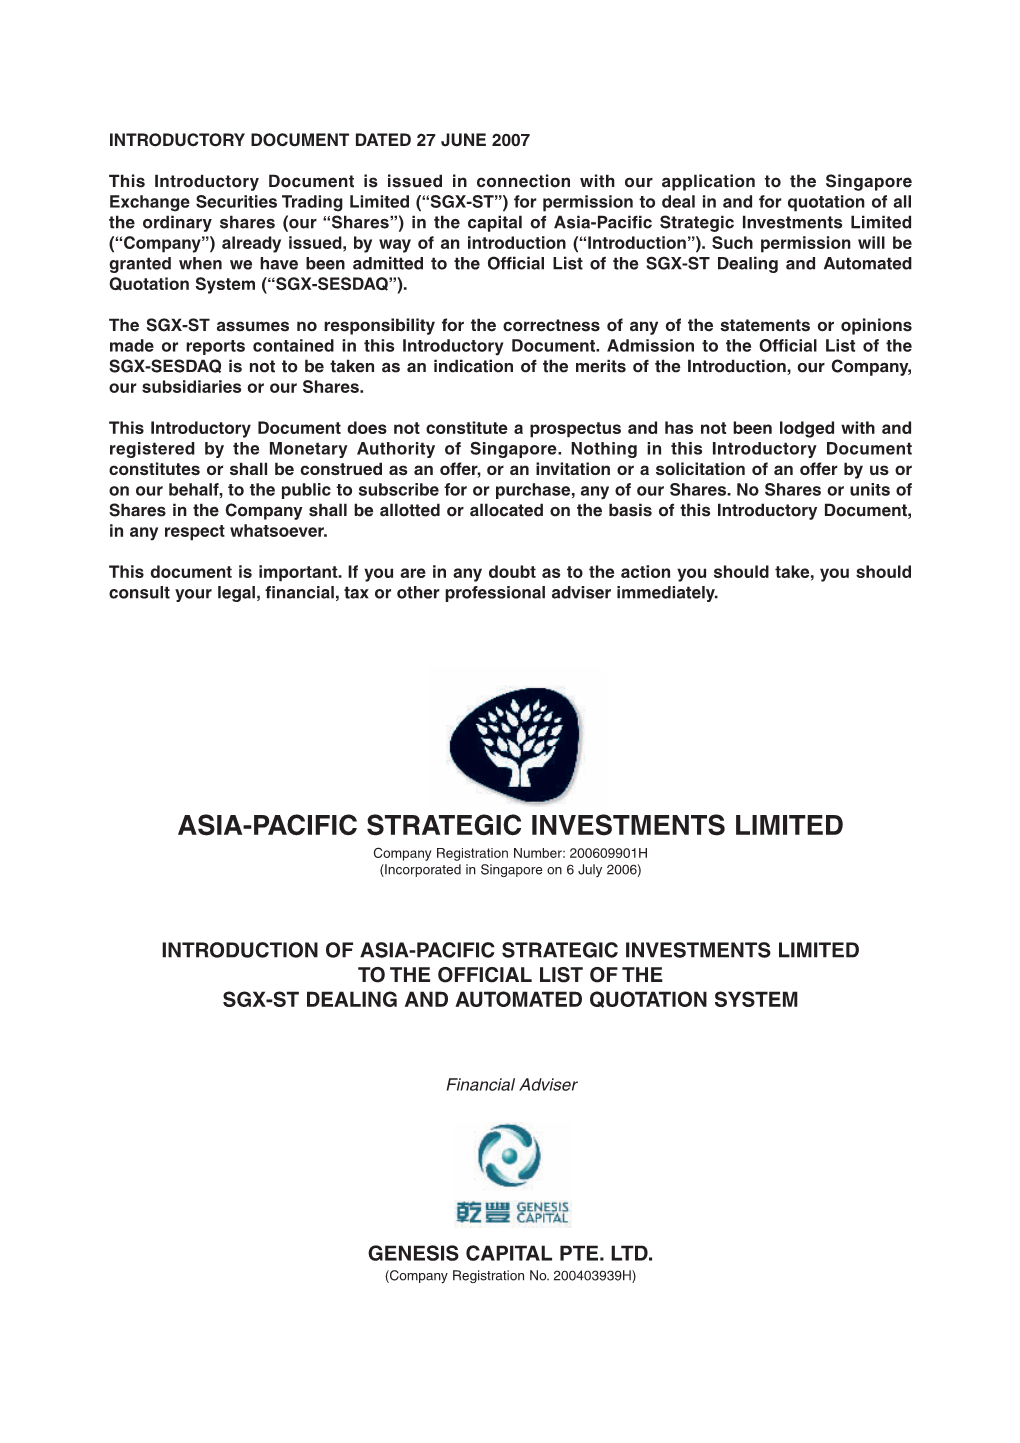 Asia-Pacific Strategic Investments Limited (“Company”) Already Issued, by Way of an Introduction (“Introduction”)